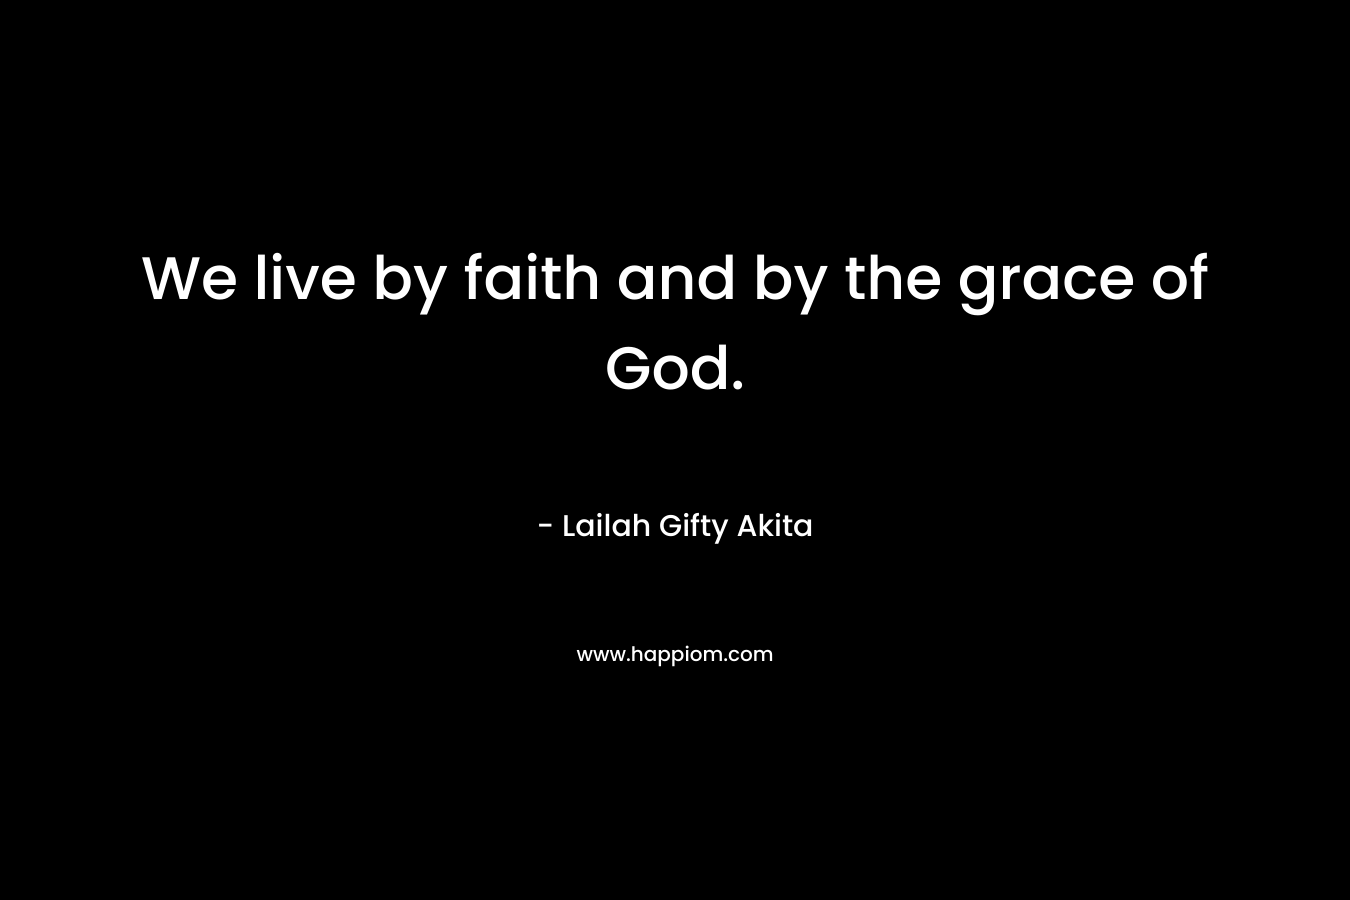 We live by faith and by the grace of God.